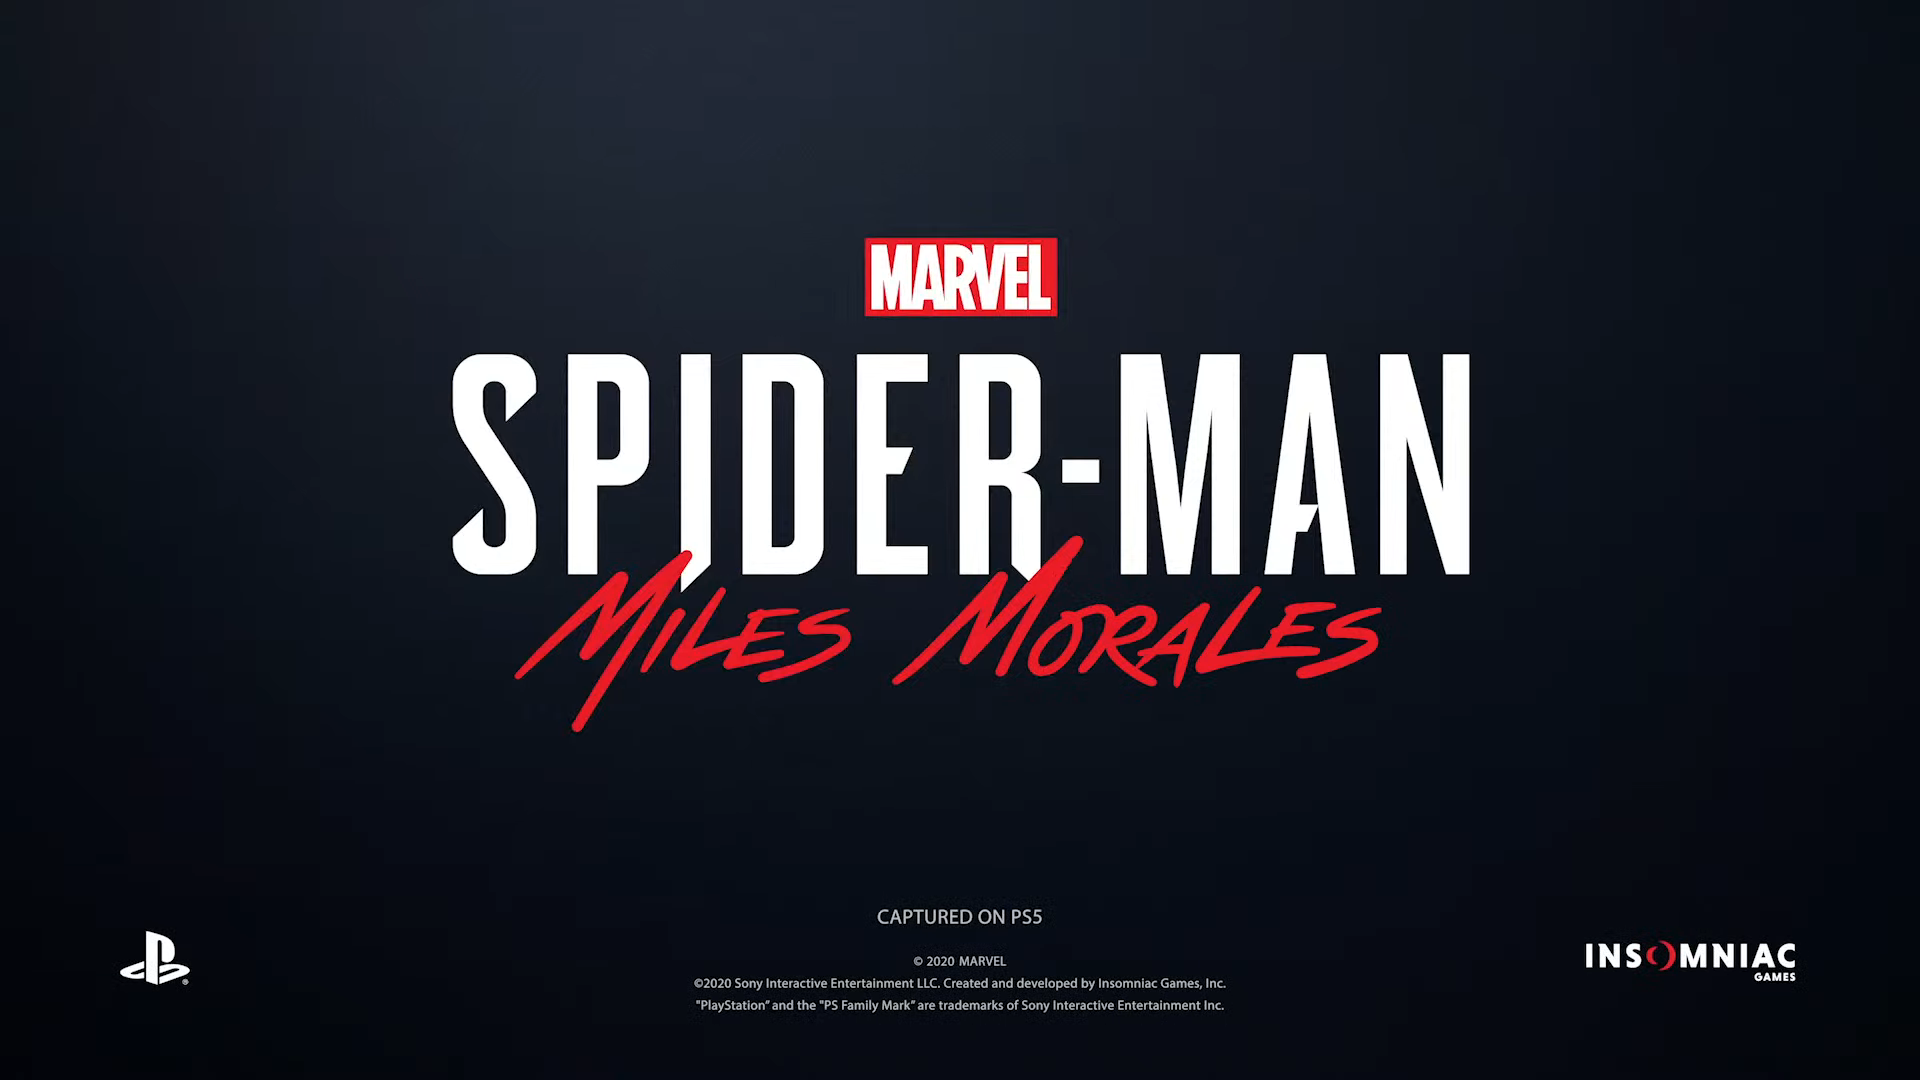 Spider Man: Miles Morales Announced For PS Coming Holiday 2020